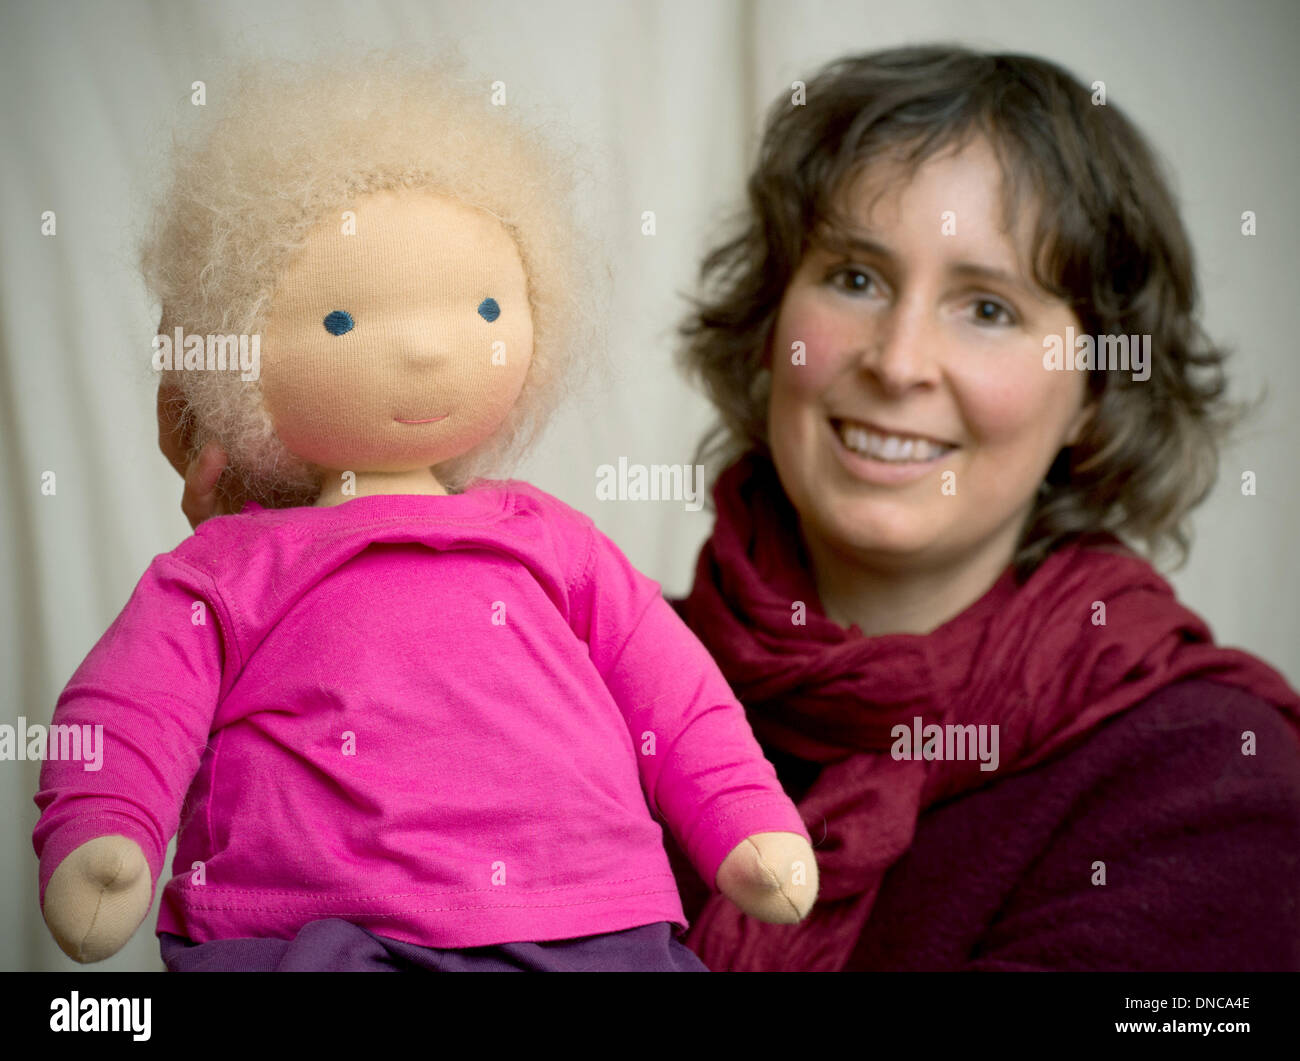 The doll maker Julia Dobrusskin-Schautt shows one of her dolls in  Niebendorf, Germany, 14 March 2013. The dolls are made of natural materials  like cotton fabric and wool and have names like